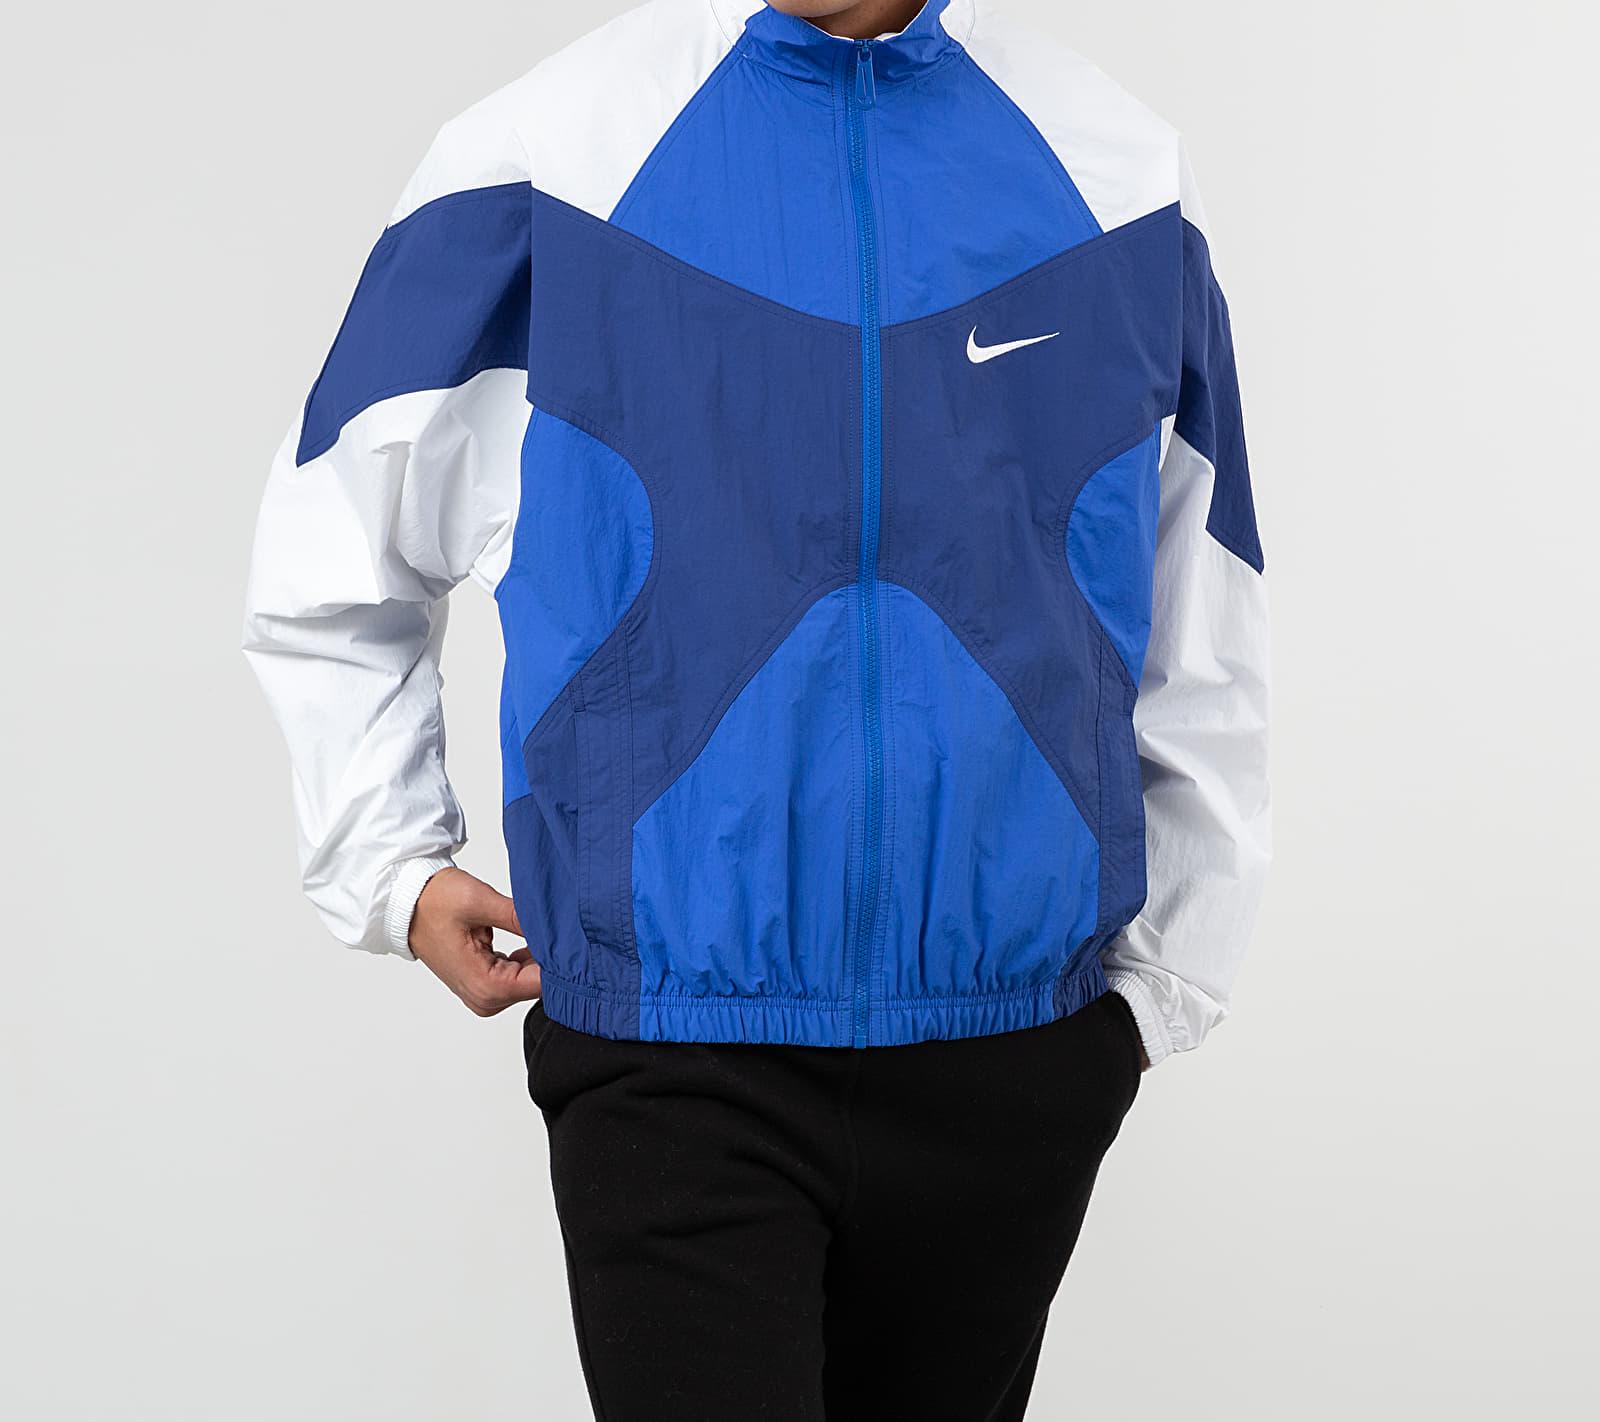 nike re issue jacket